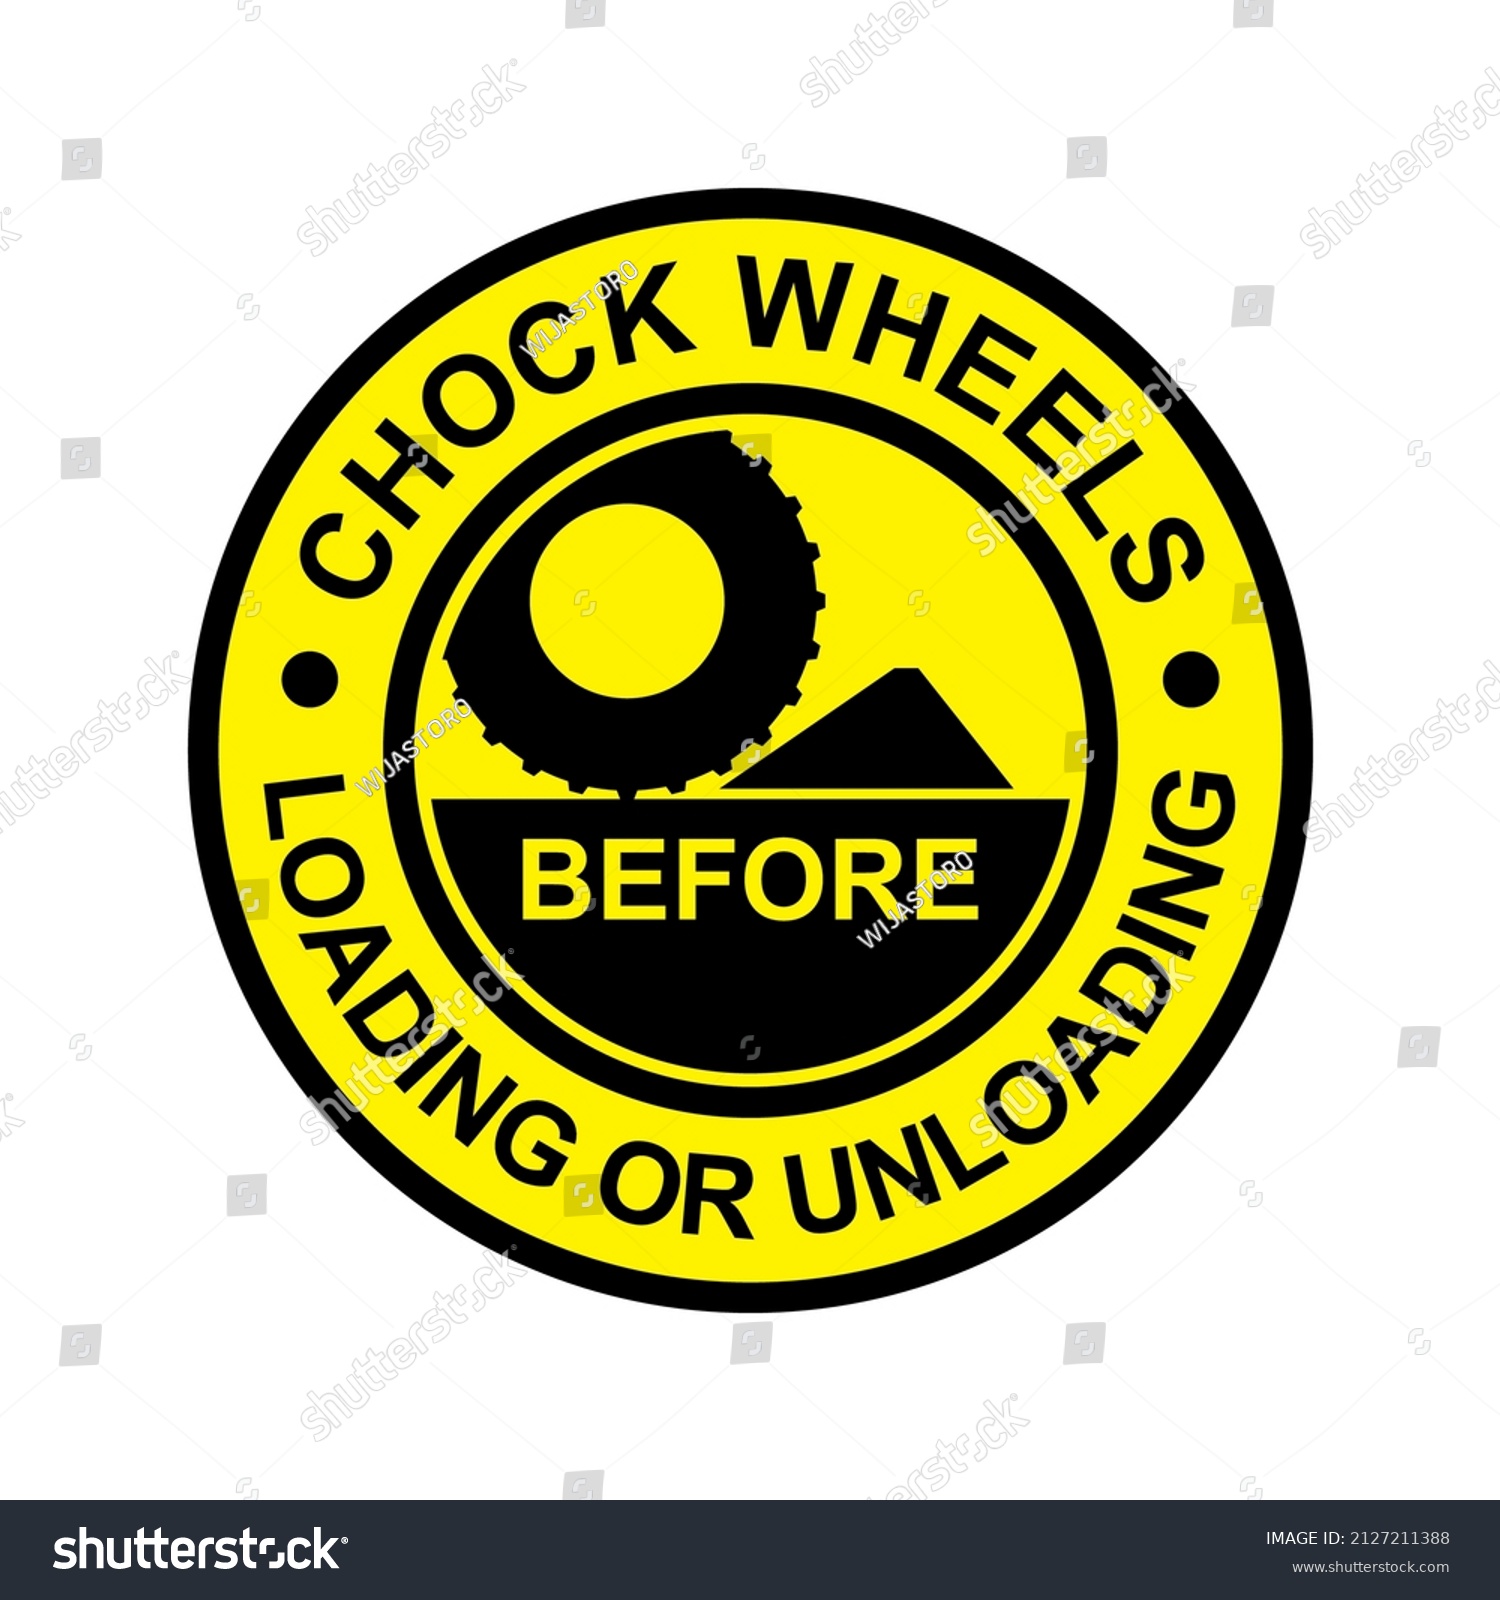 SVG of Chock wheels before loading or unloading rounded sign safety rules for vehicle. Sticker and label design vector template. Industrial and manufacturing svg